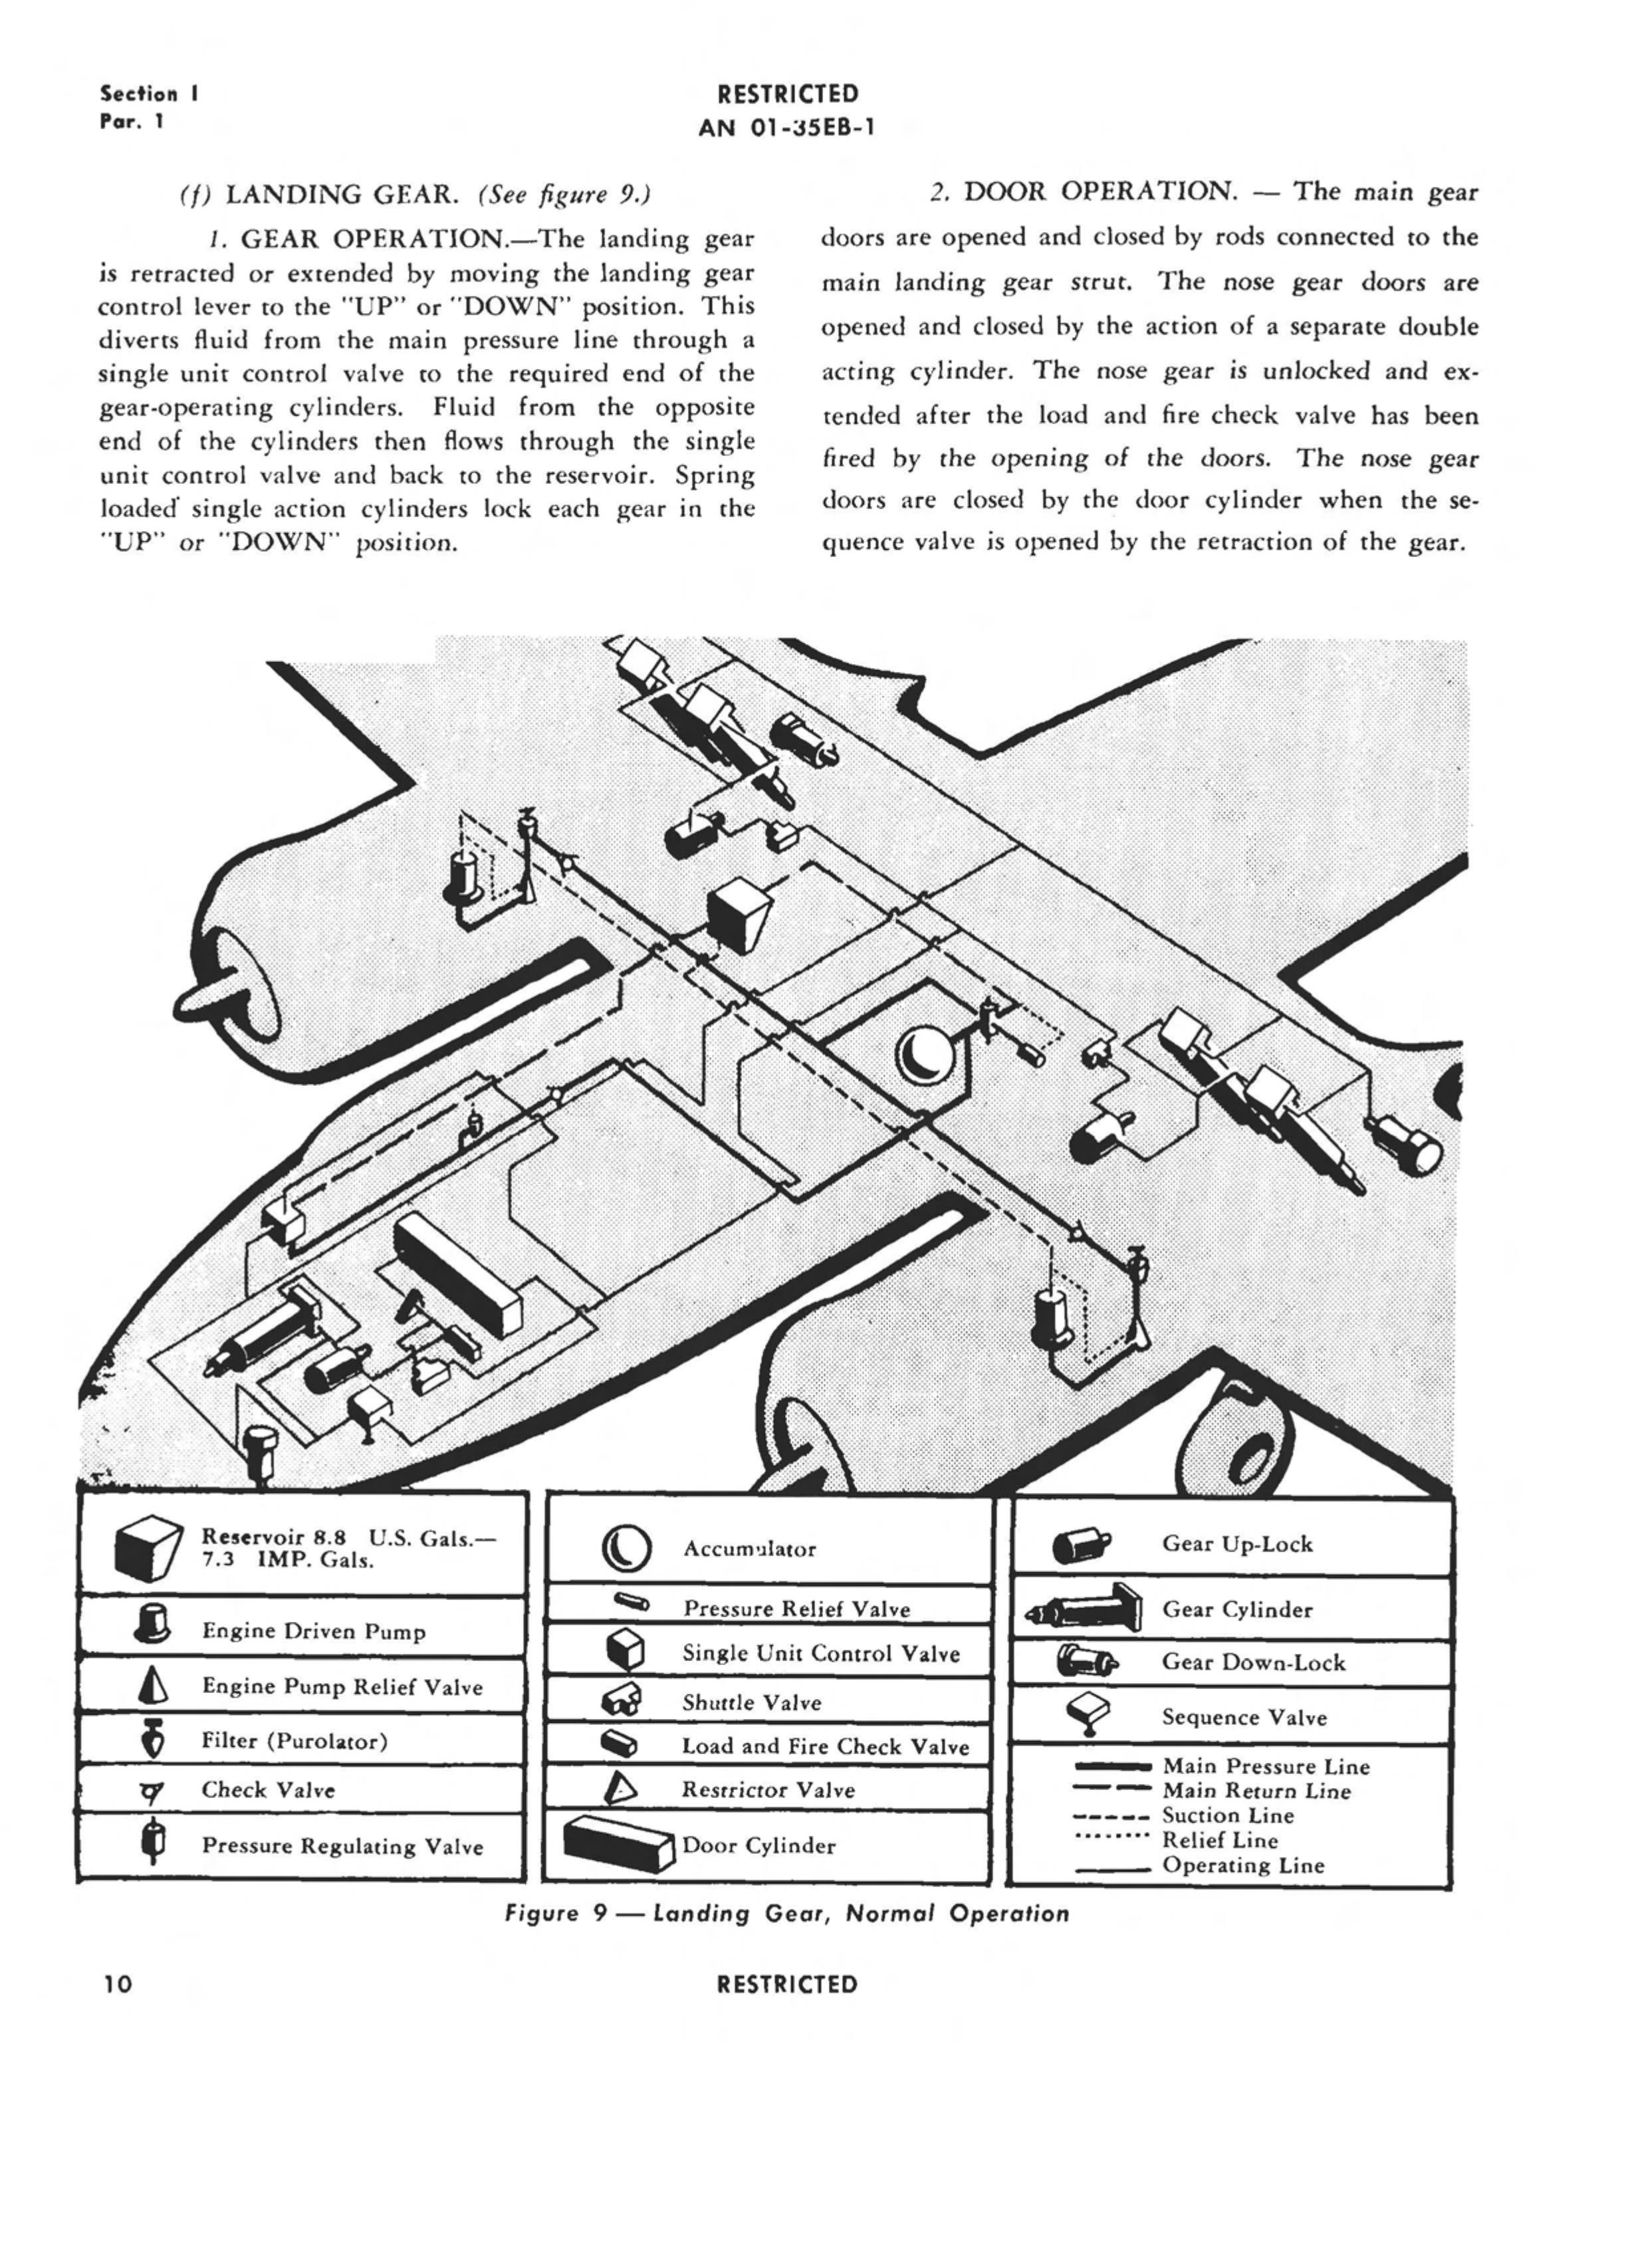 Sample page 13 from AirCorps Library document: Pilot's Flight Operating Instructions for B-26B-1 and -26C